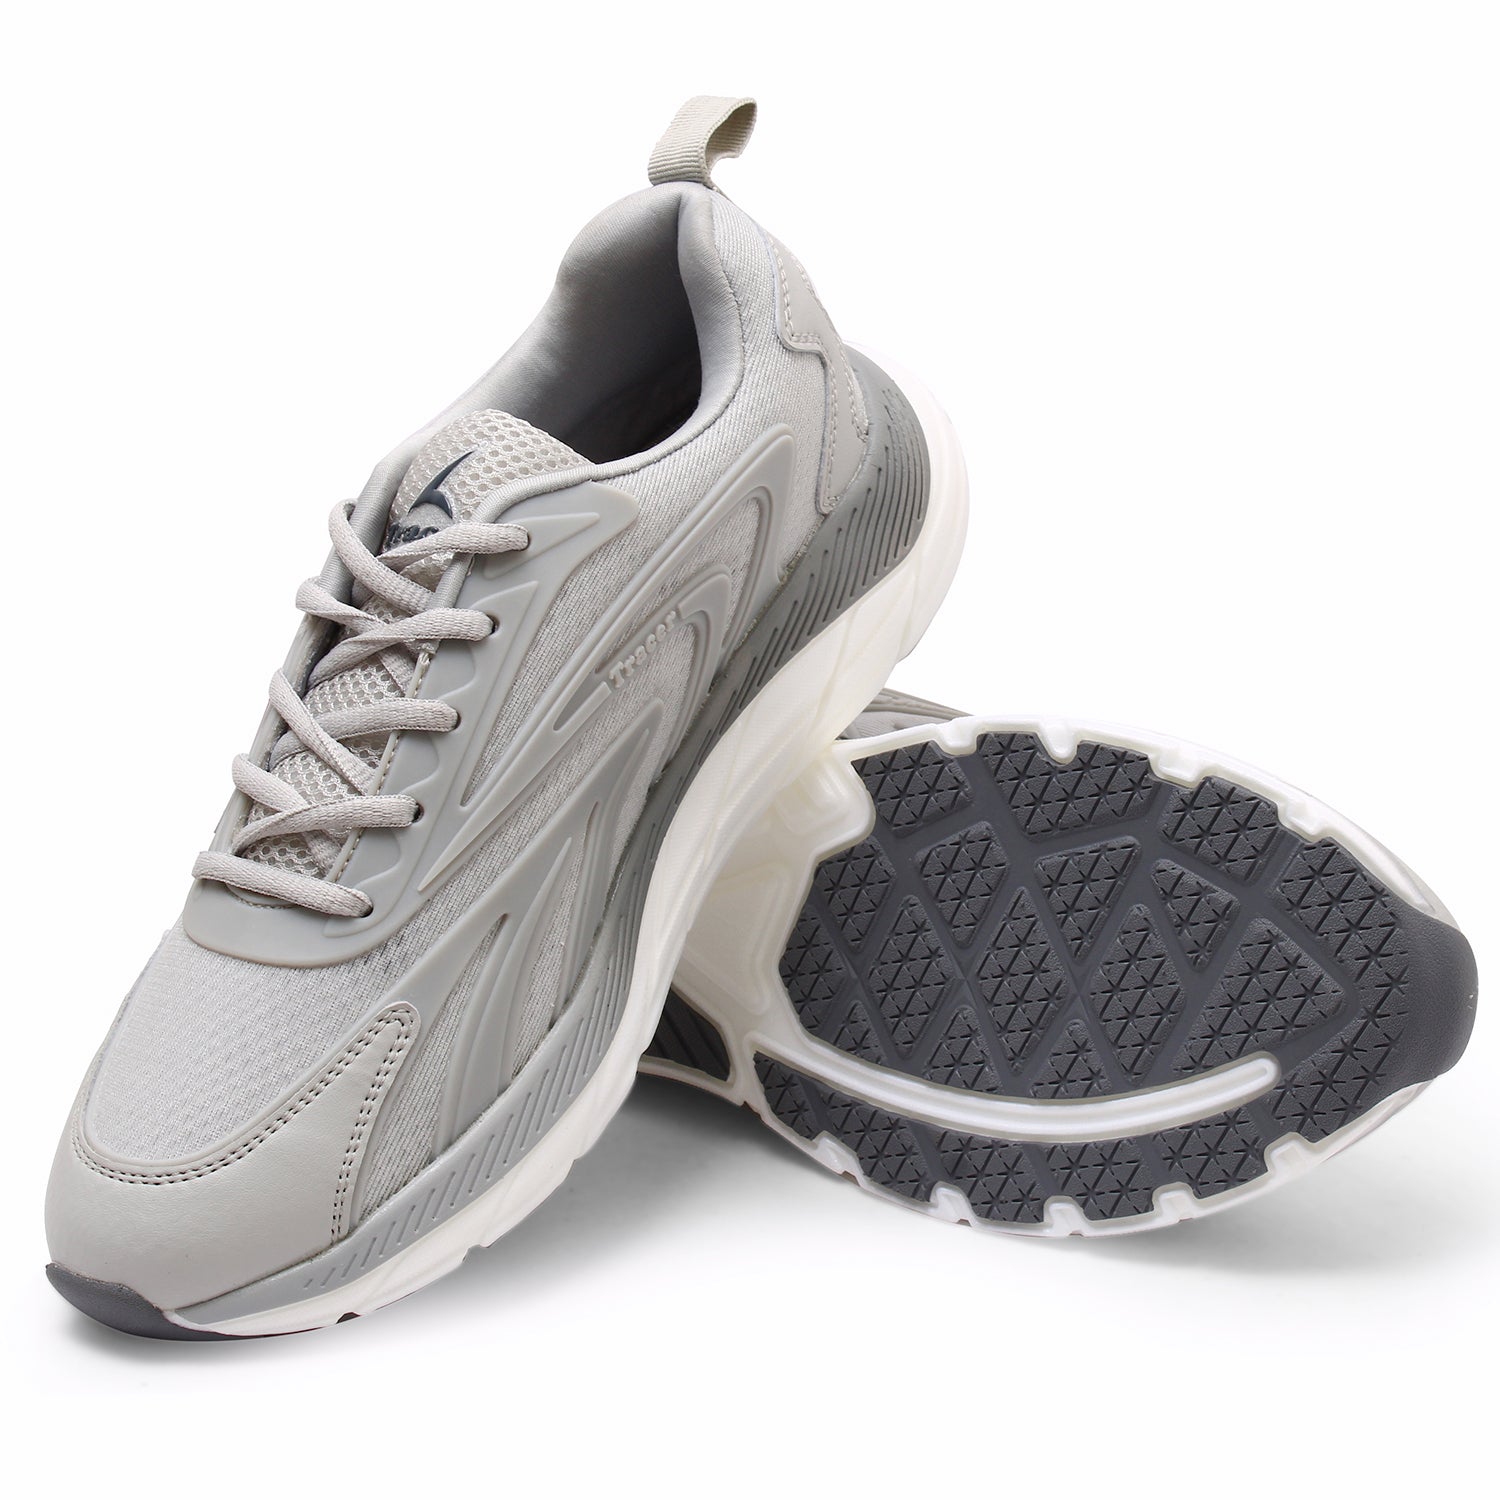 Tracer Ultimate 2272 Grey